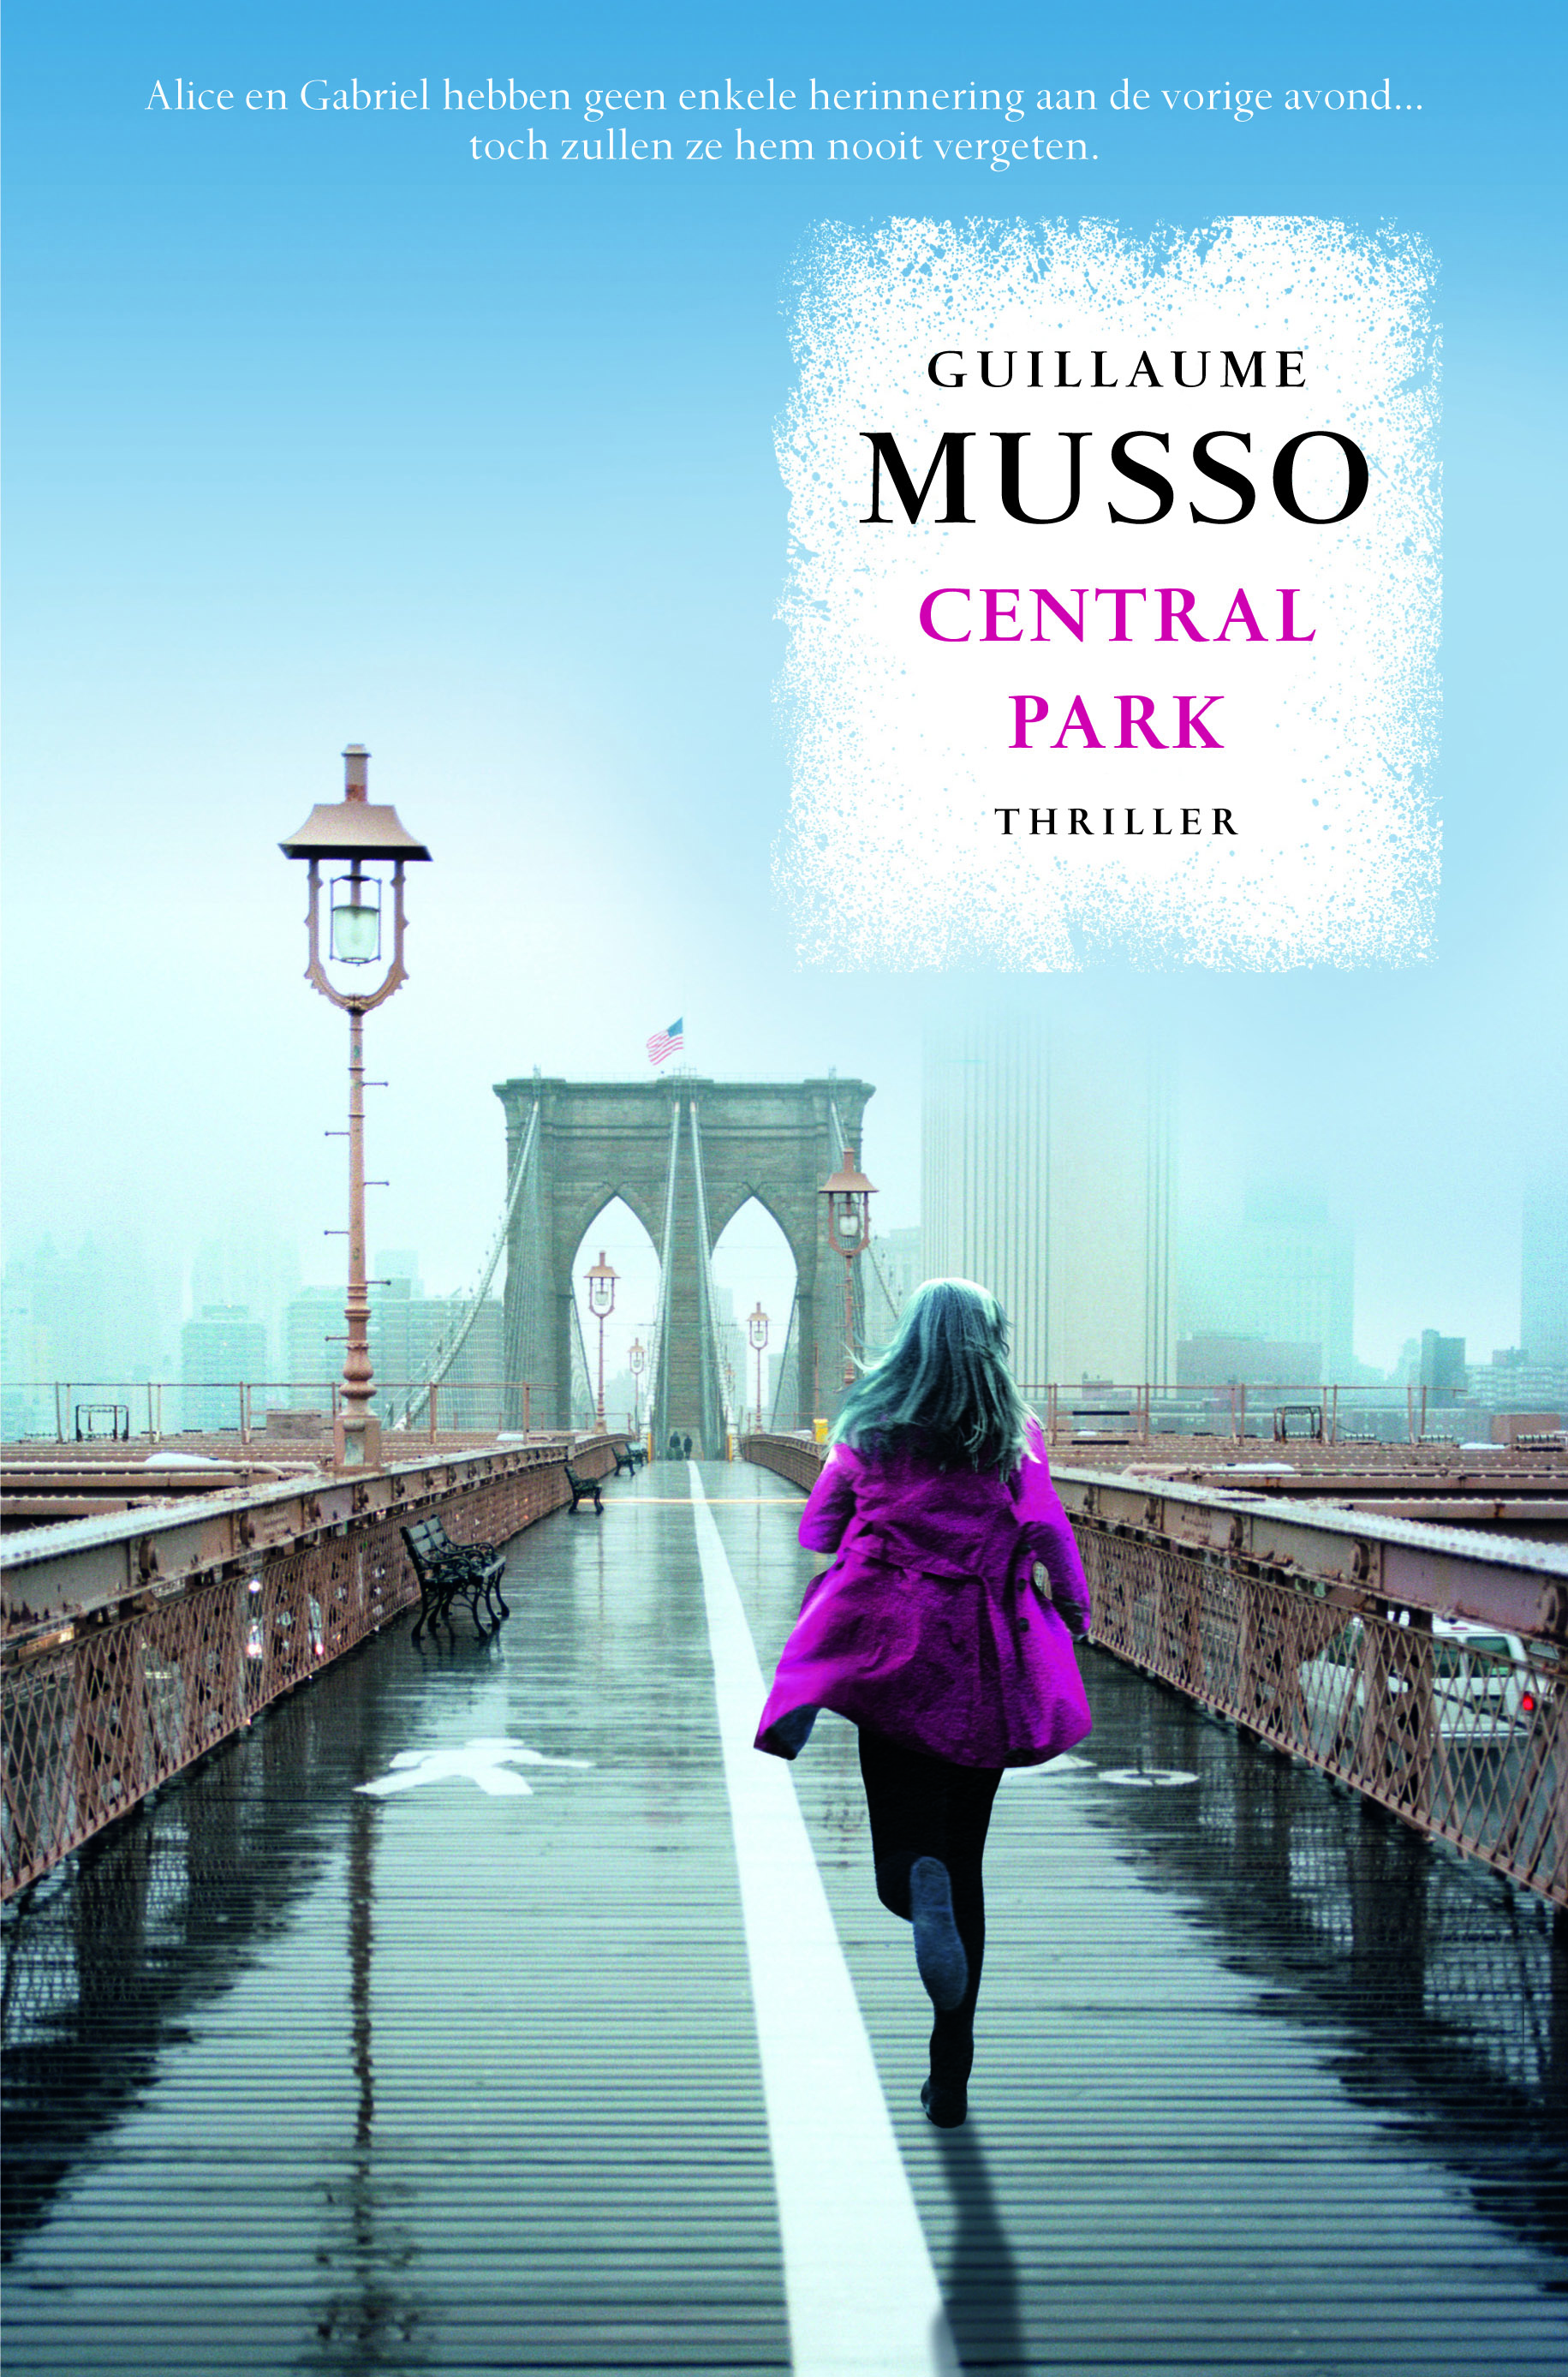 CENTRAL PARK ▭ GUILLAUME MUSSO 